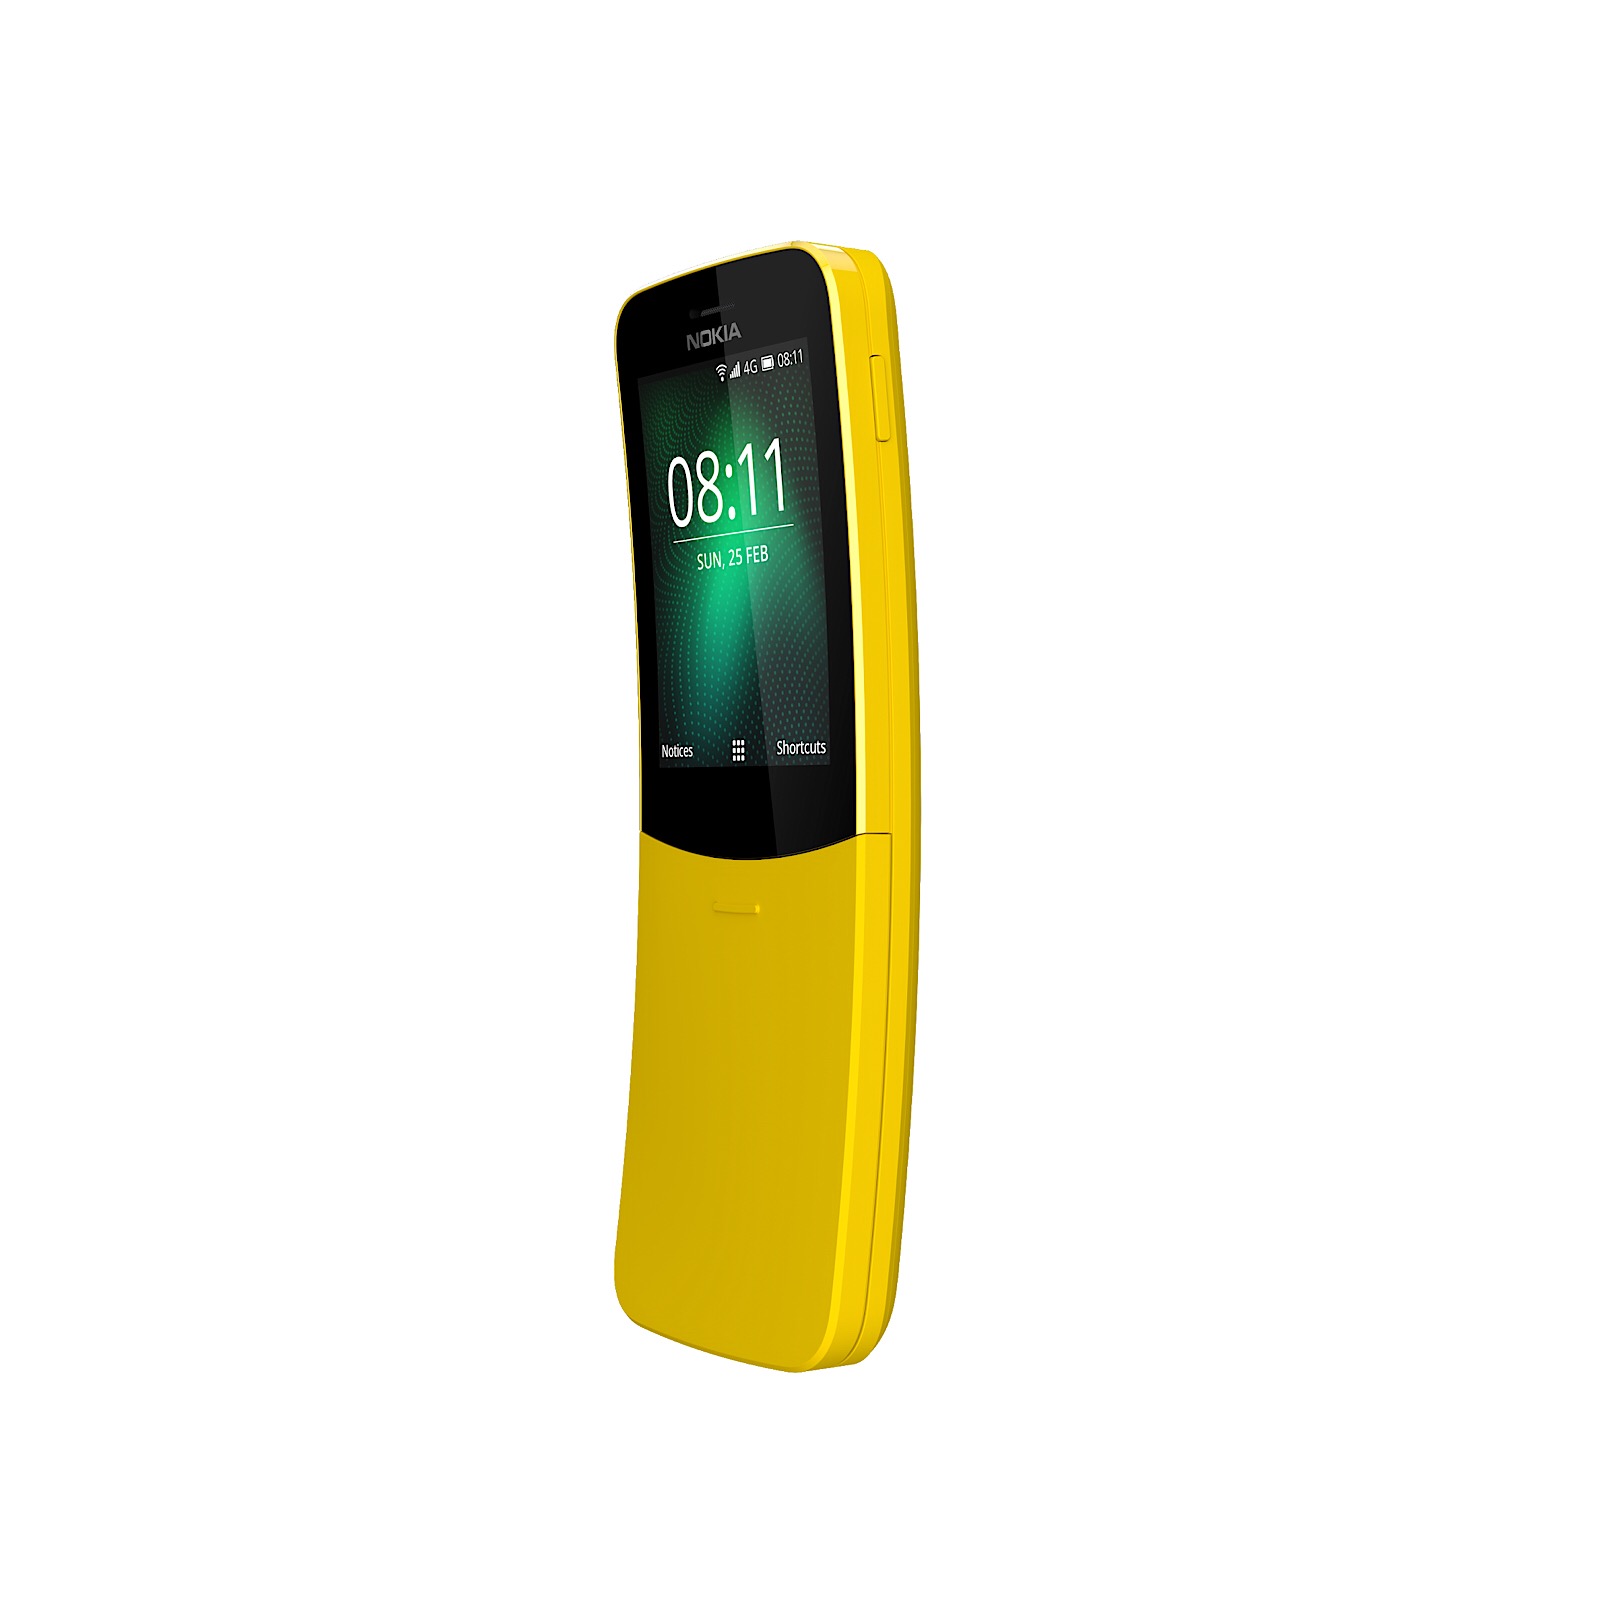 Nokia's old school 8110 reinvented for 4G Australia – Pickr